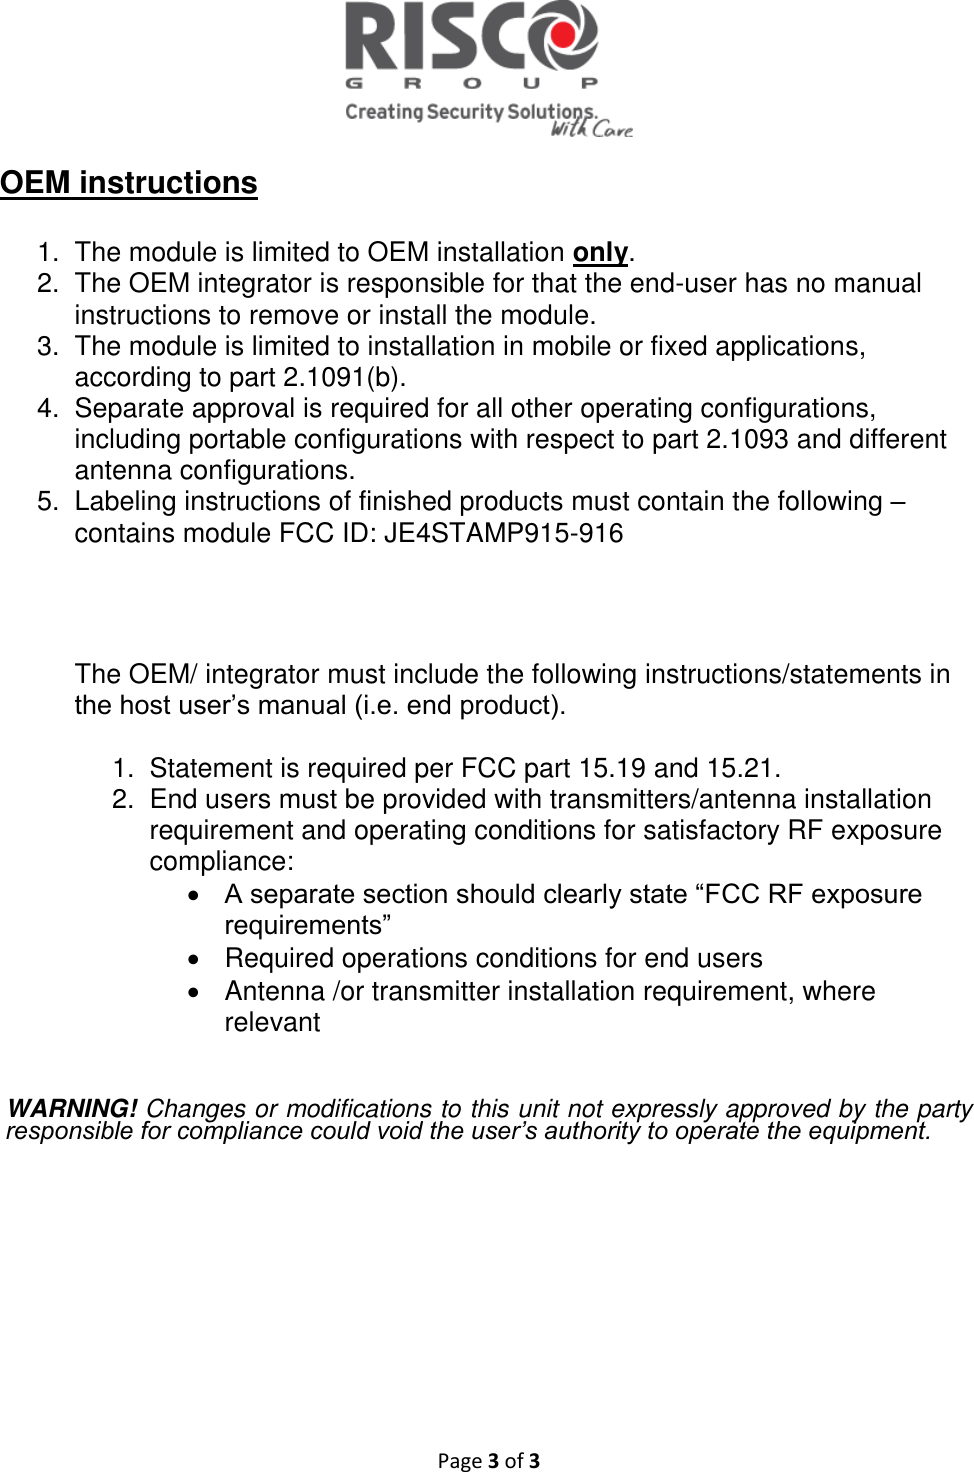   Page 3 of 3  OEM instructions  1.  The module is limited to OEM installation only. 2.  The OEM integrator is responsible for that the end-user has no manual instructions to remove or install the module. 3.  The module is limited to installation in mobile or fixed applications, according to part 2.1091(b). 4.  Separate approval is required for all other operating configurations, including portable configurations with respect to part 2.1093 and different antenna configurations. 5.  Labeling instructions of finished products must contain the following – contains module FCC ID: JE4STAMP915-916      The OEM/ integrator must include the following instructions/statements in the host user’s manual (i.e. end product).  1.  Statement is required per FCC part 15.19 and 15.21. 2.  End users must be provided with transmitters/antenna installation requirement and operating conditions for satisfactory RF exposure compliance:  A separate section should clearly state “FCC RF exposure requirements”    Required operations conditions for end users   Antenna /or transmitter installation requirement, where relevant    WARNING! Changes or modifications to this unit not expressly approved by the party responsible for compliance could void the user’s authority to operate the equipment.     